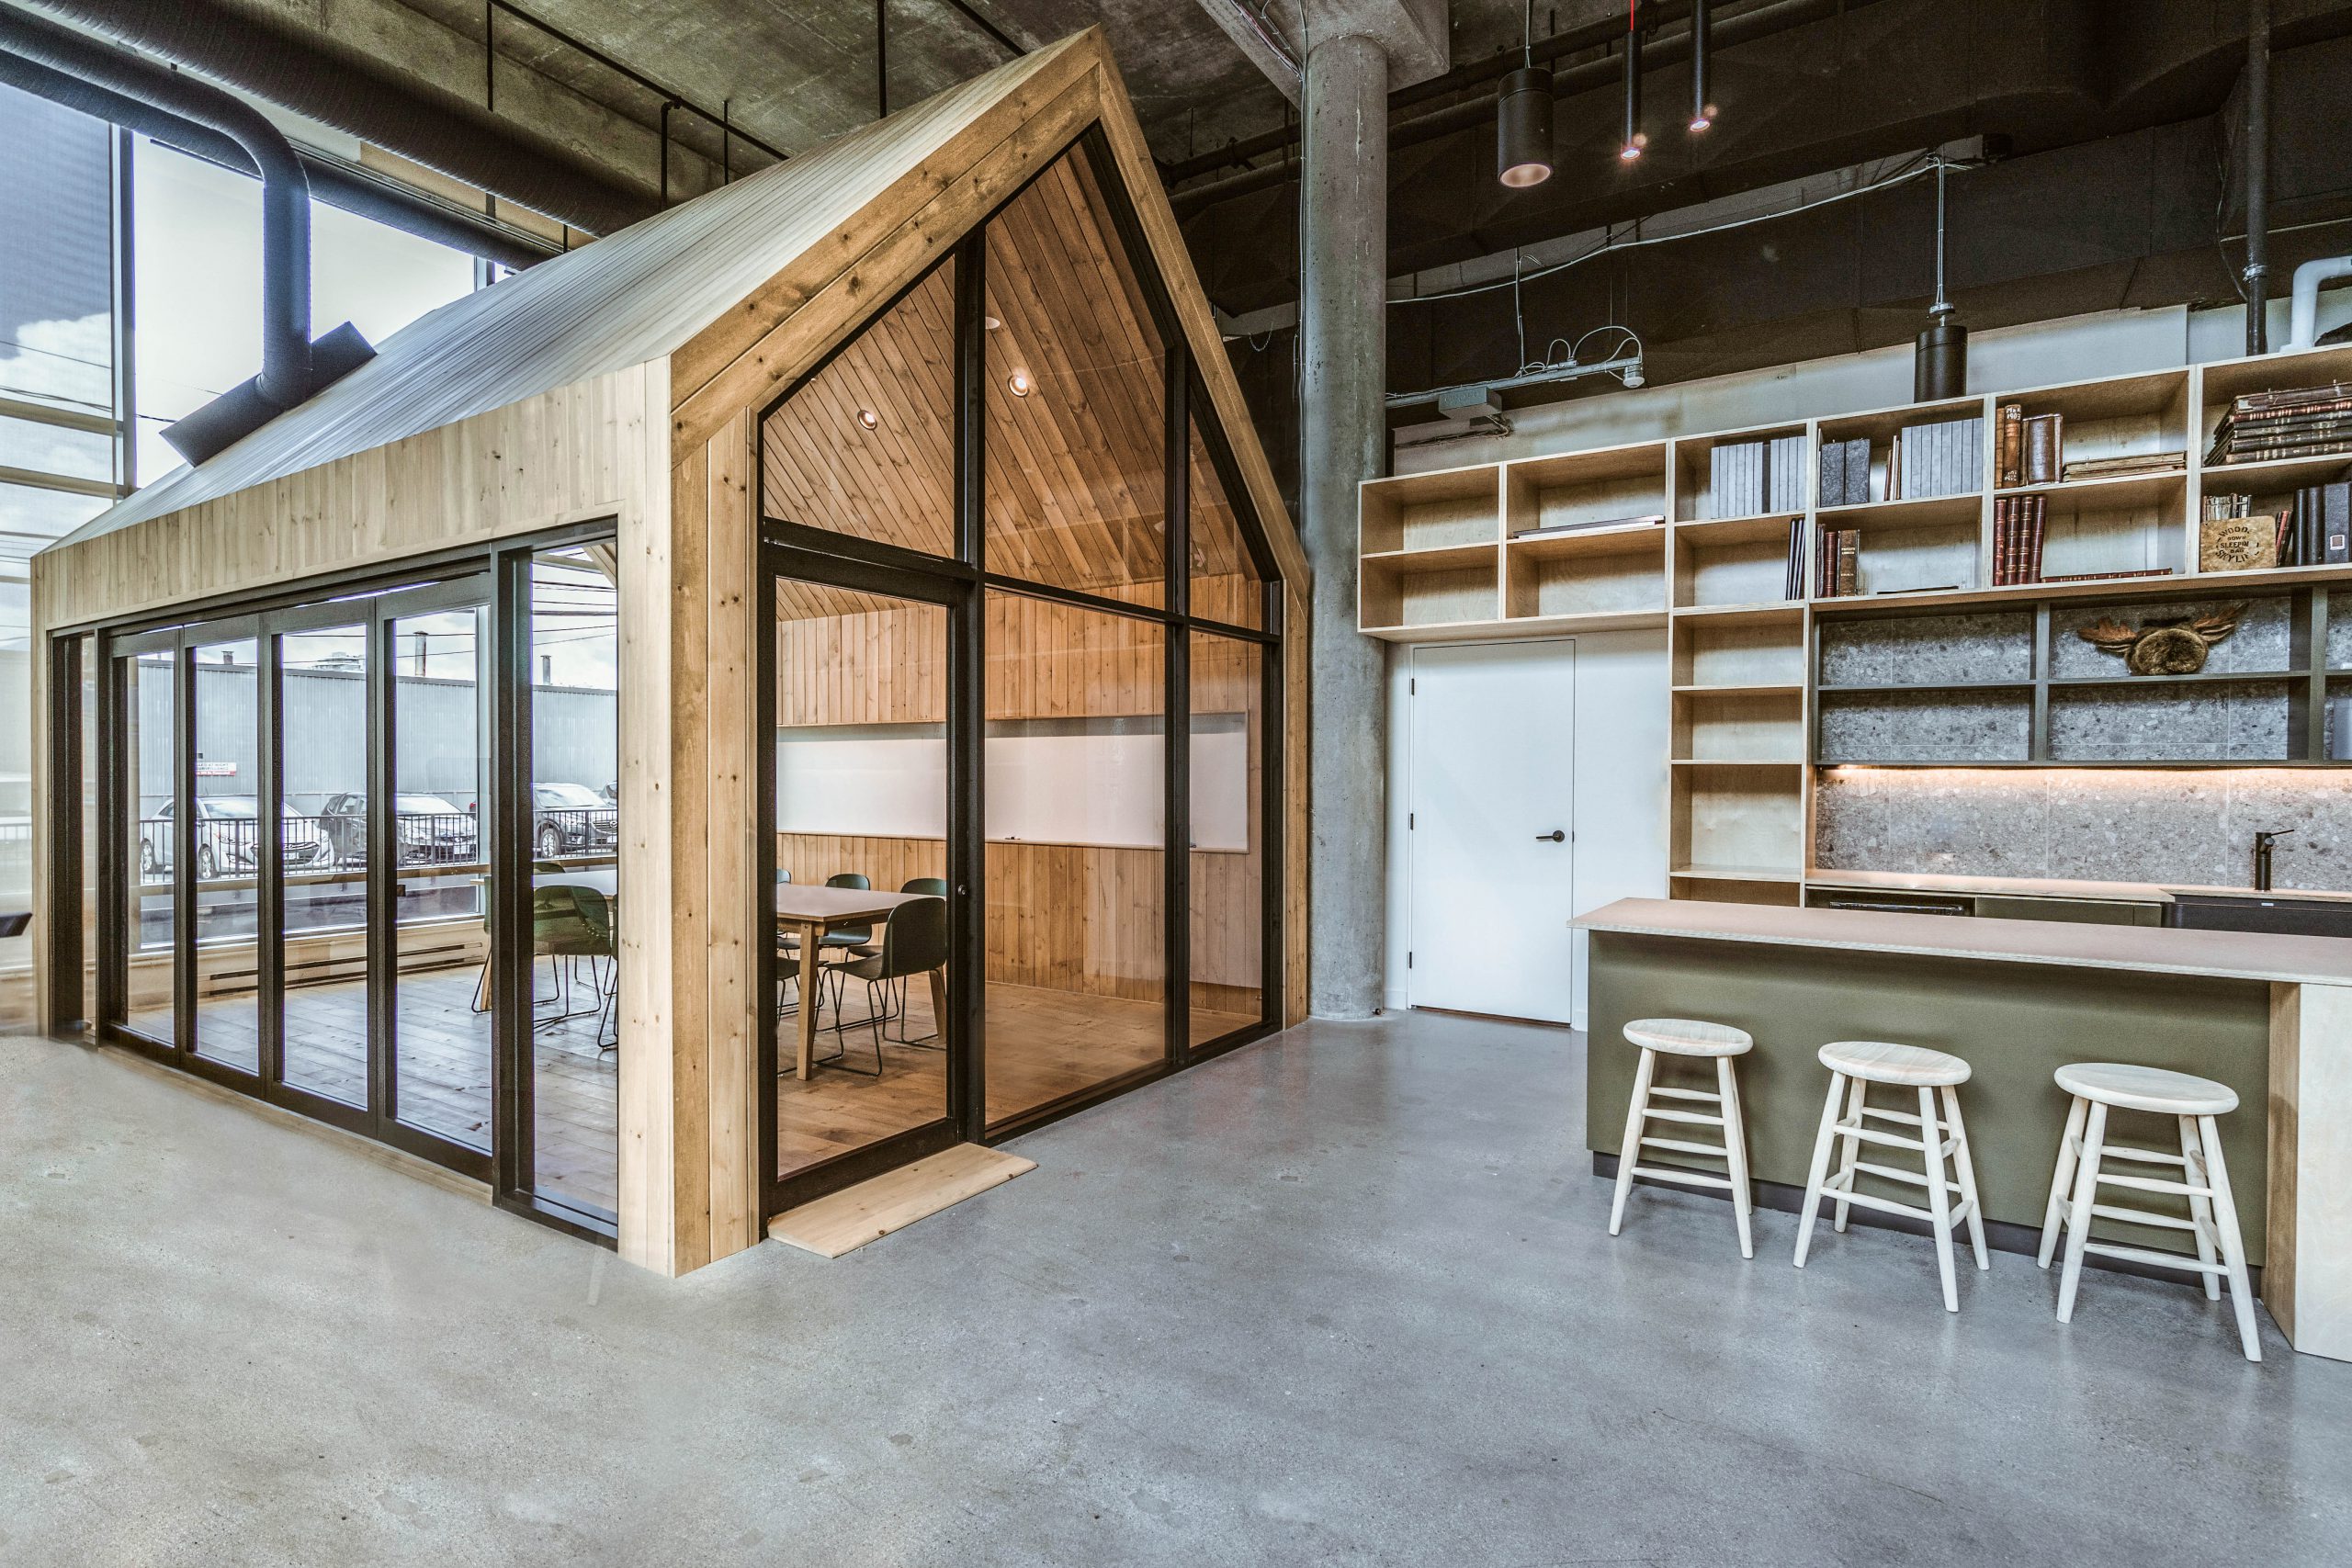 Meeting Room, Showroom Design, Woods Product Development Lab in Vancouver BC, by Cutler